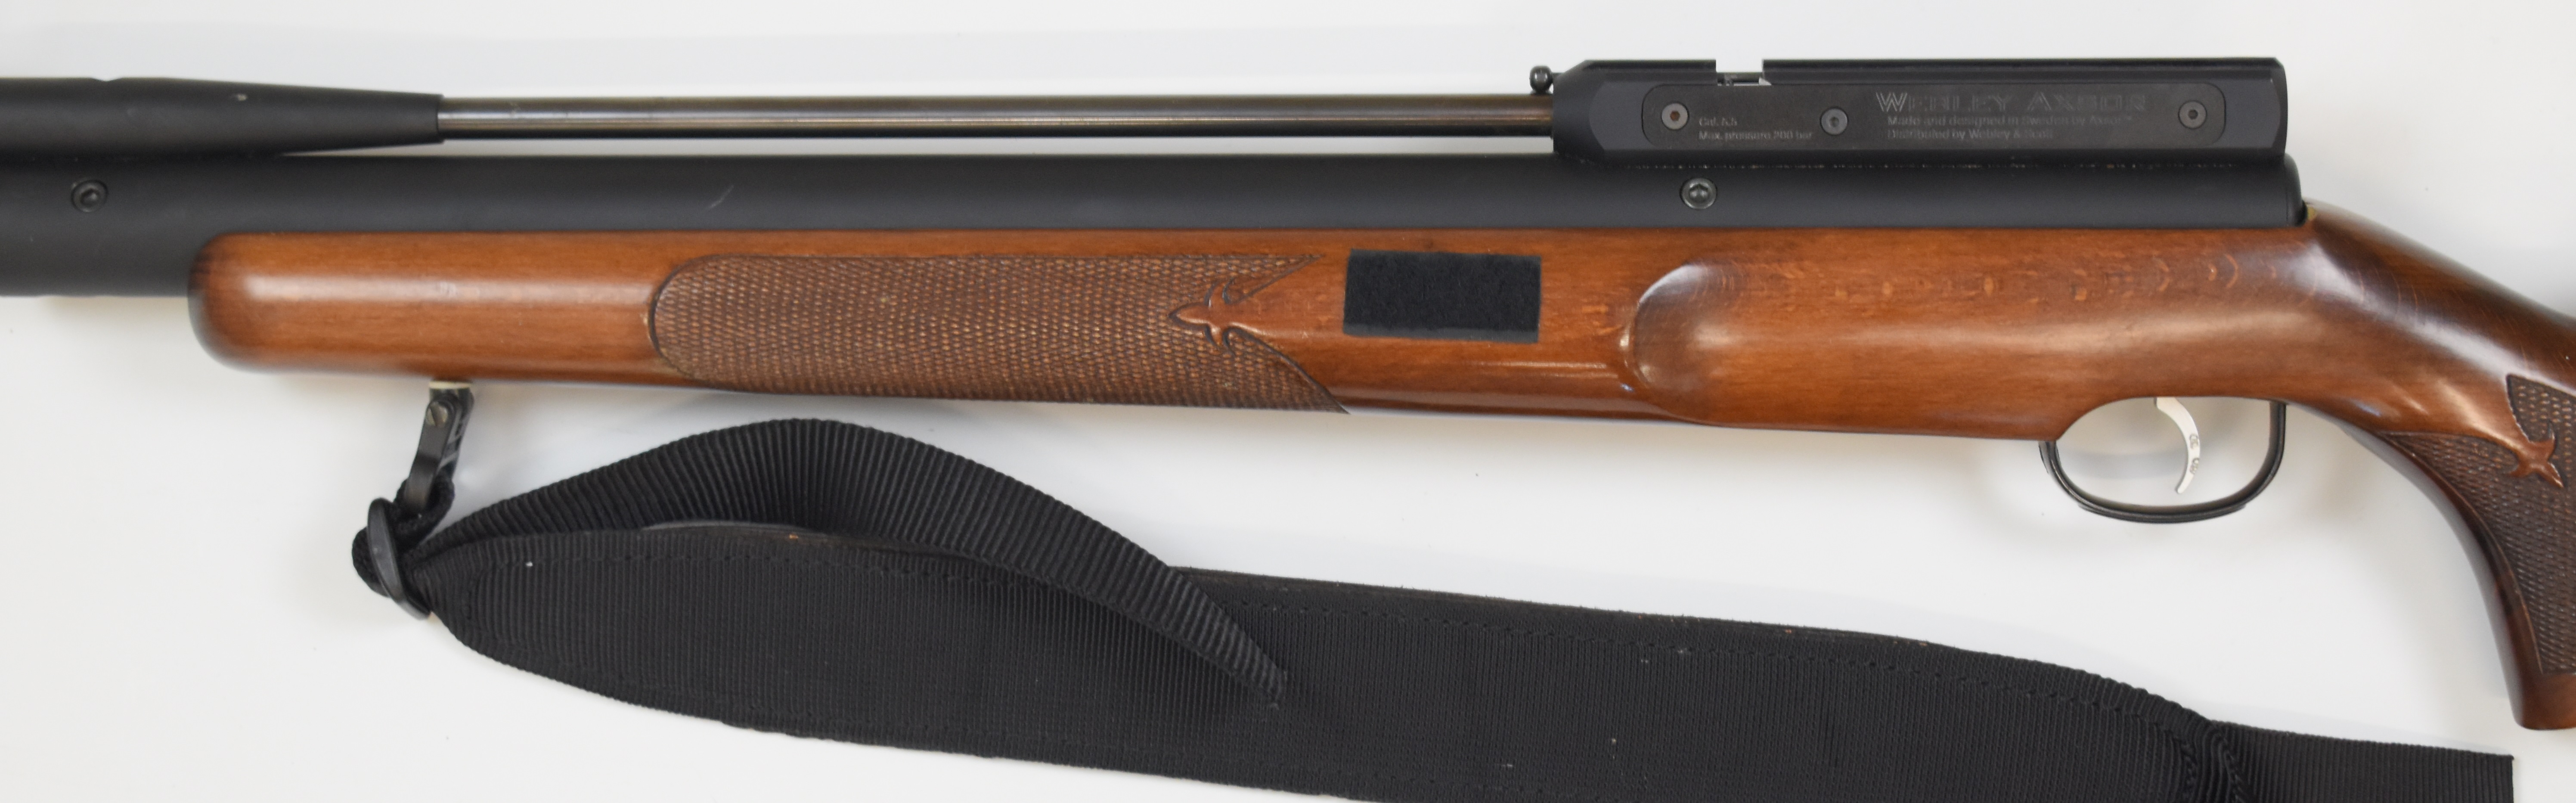 Webley Axsor .22 PCP air rifle with chequered semi-pistol grip and forend, raised cheek piece, - Image 8 of 10